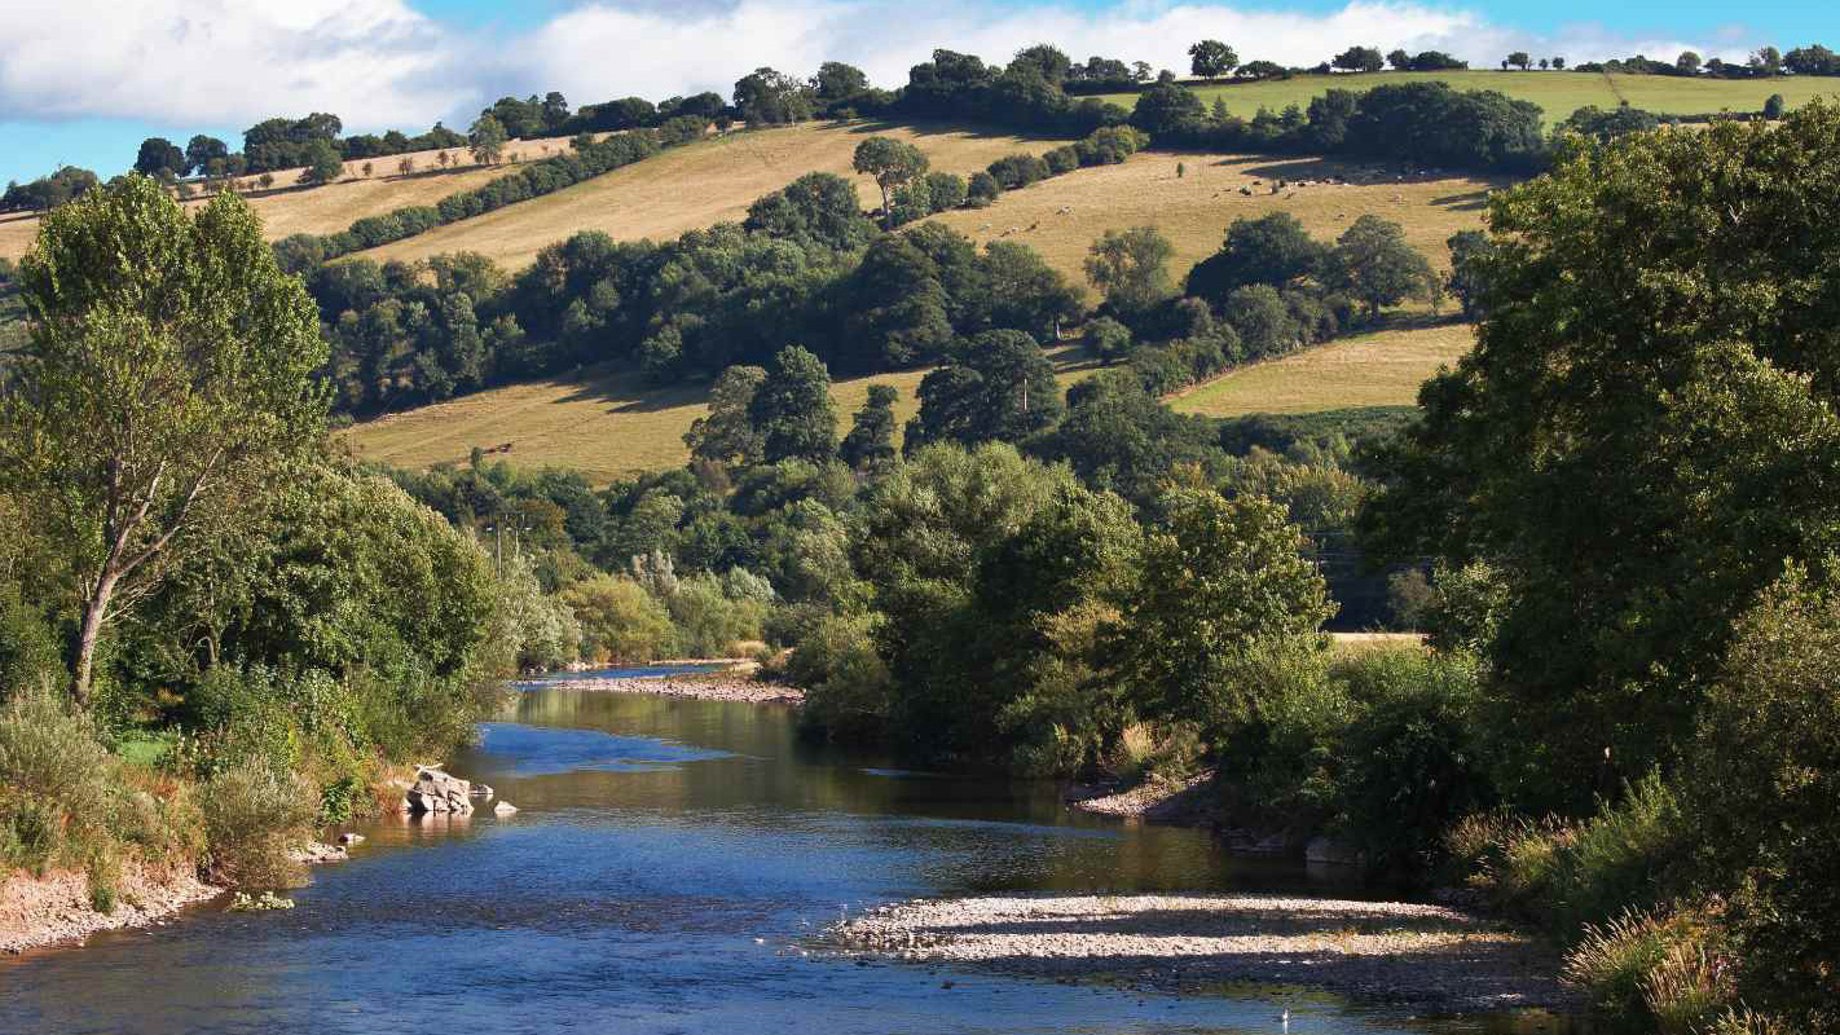 An image of River Usk, Wales